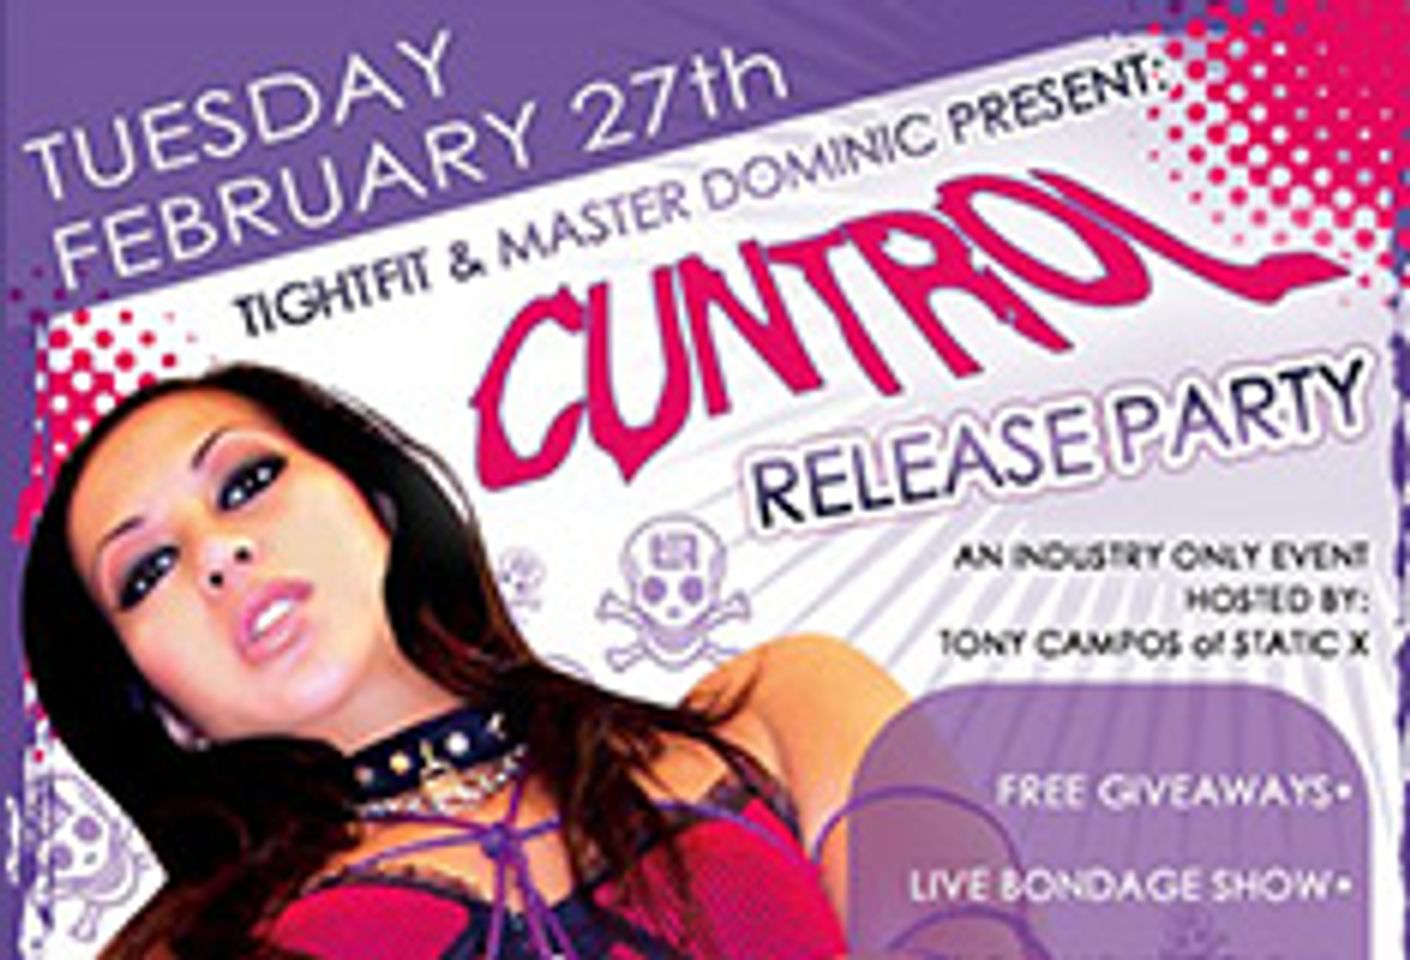 Tightfit, Master Dominic to Throw <i>Cuntrol</i> Release Party